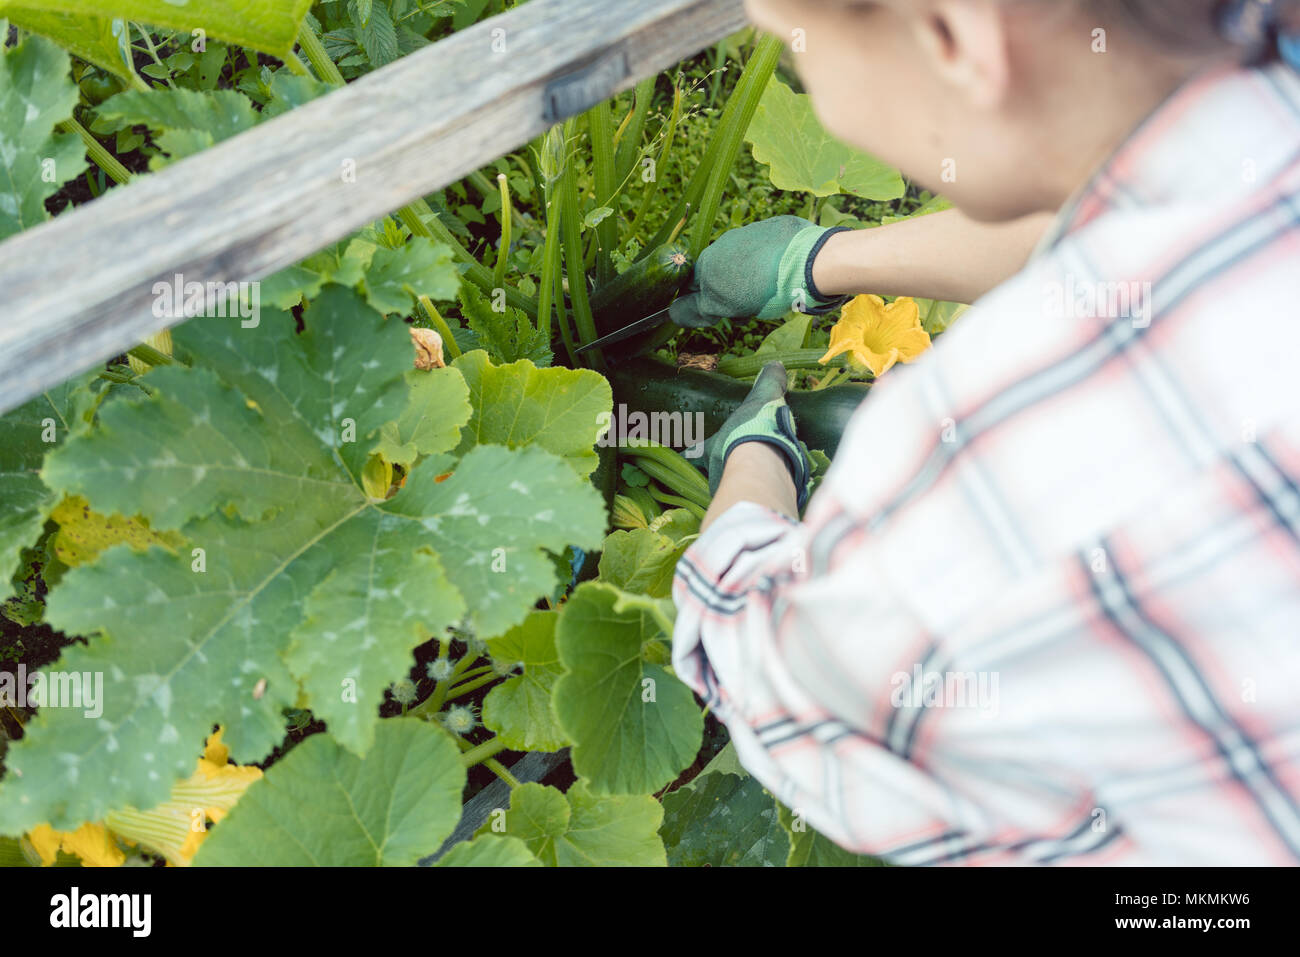 Woman in her garden harvesting cucumbers or courgette Stock Photo